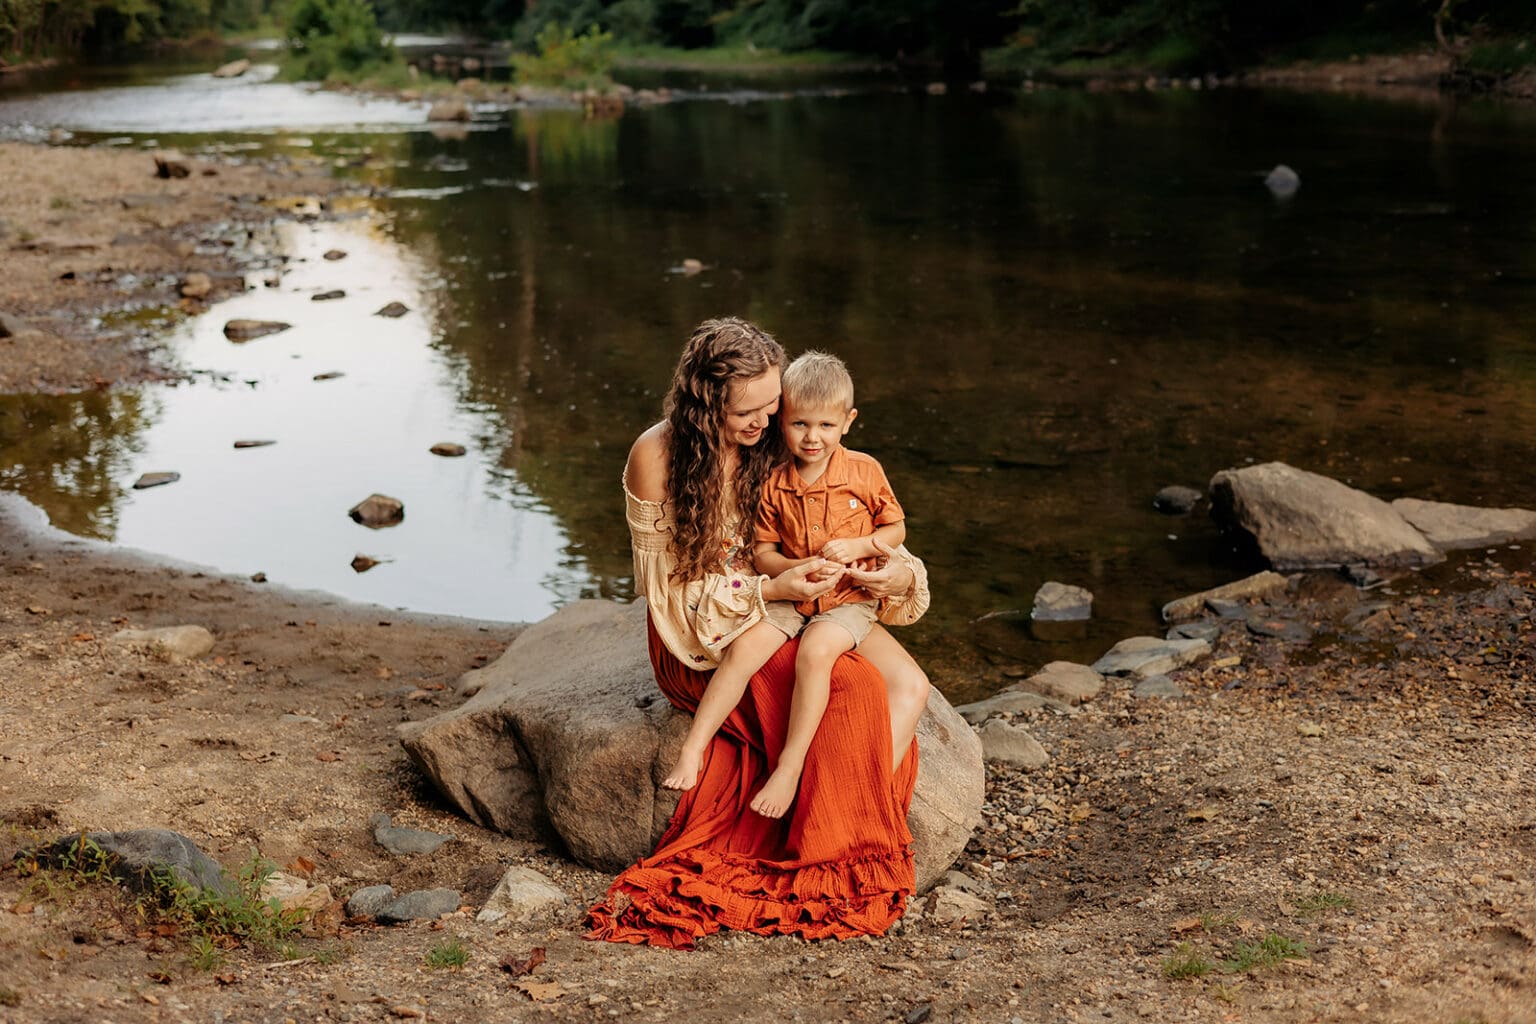 Young mother and son sitting on a rock by a tranquil river, sharing a moment of closeness in a picturesque outdoor lifestyle photography session.